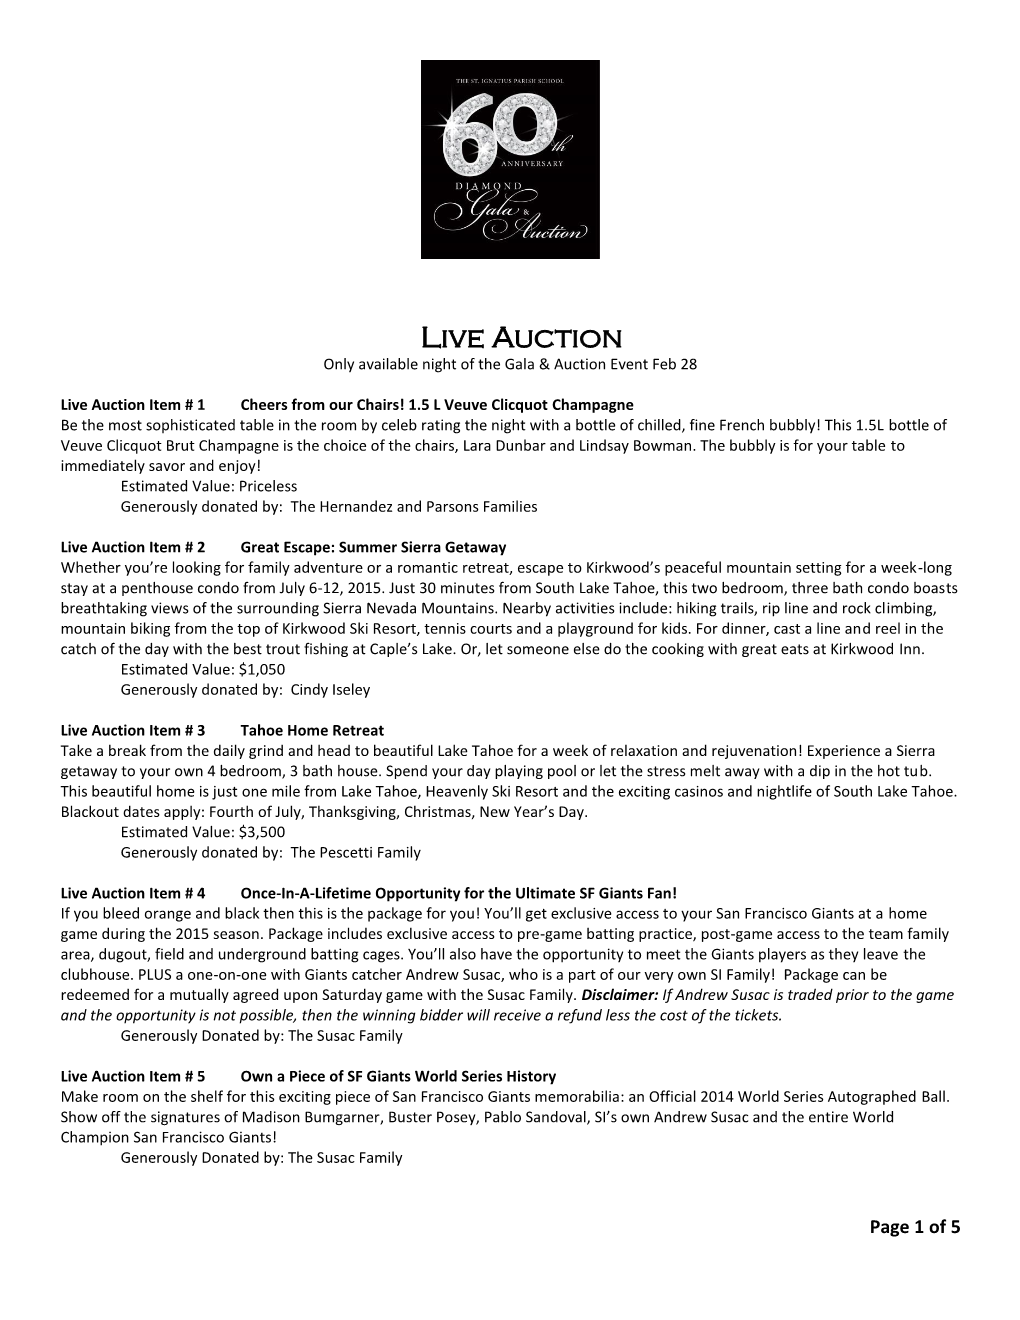 Live Auction Only Available Night of the Gala & Auction Event Feb 28